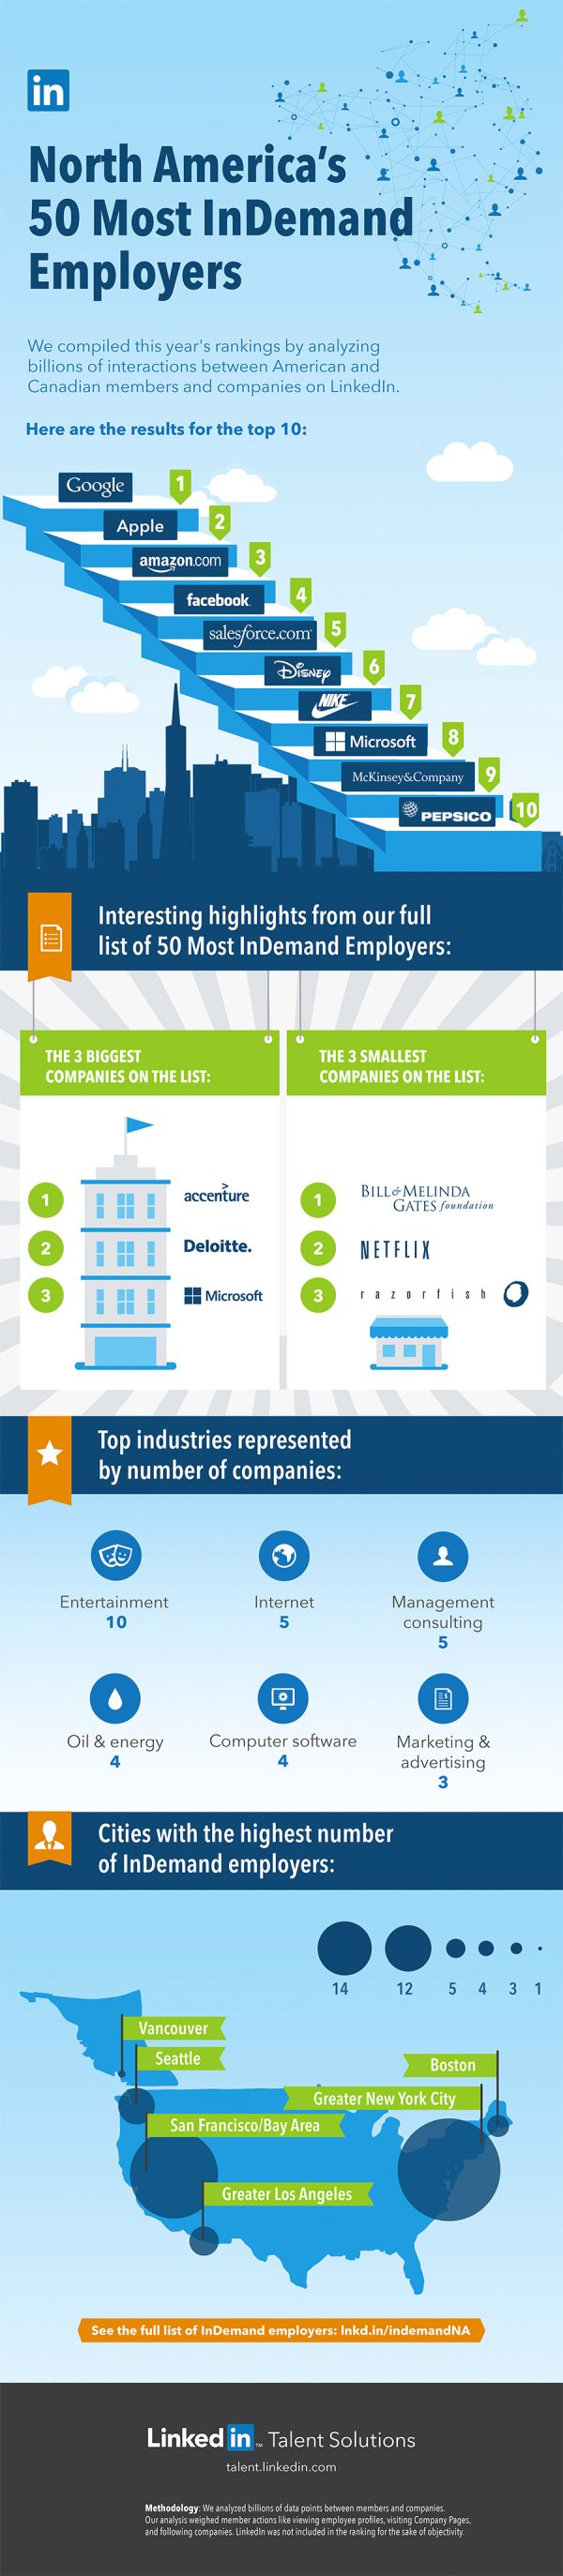 Most In Demand Employers_Infographic